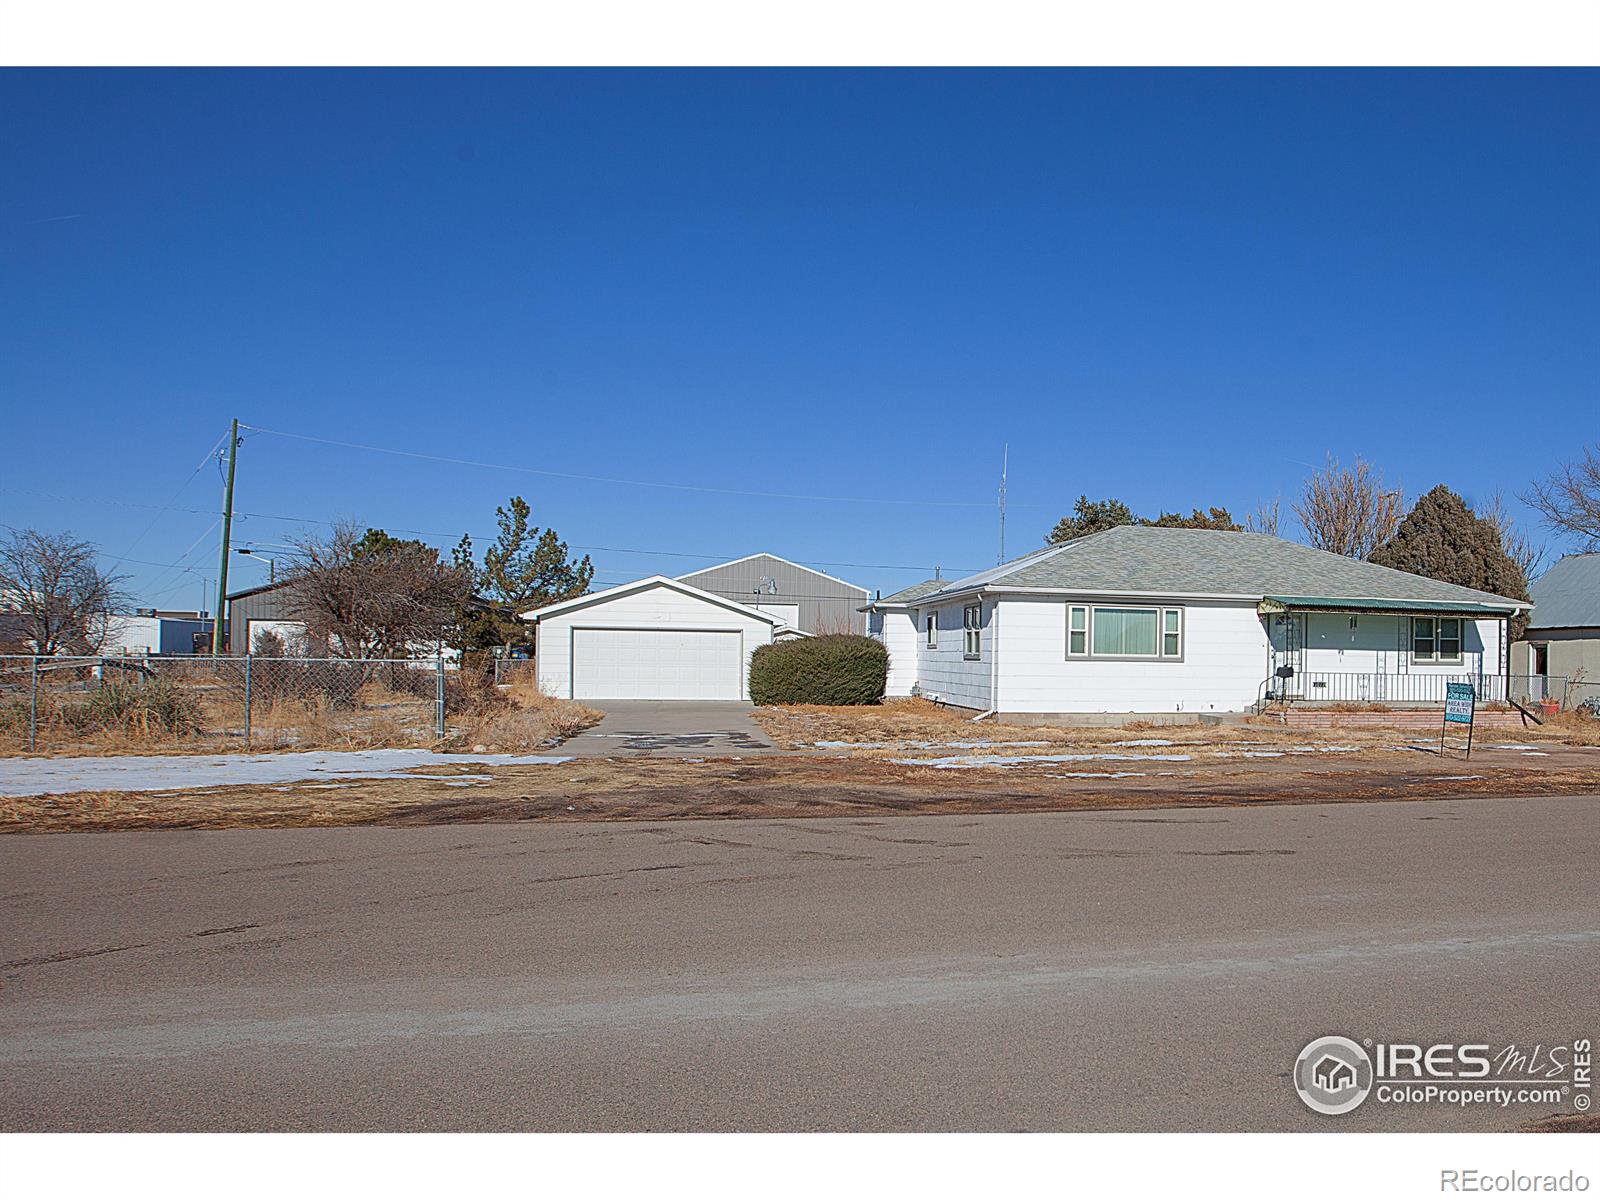 CMA Image for 704 n 6th street,Sterling, Colorado